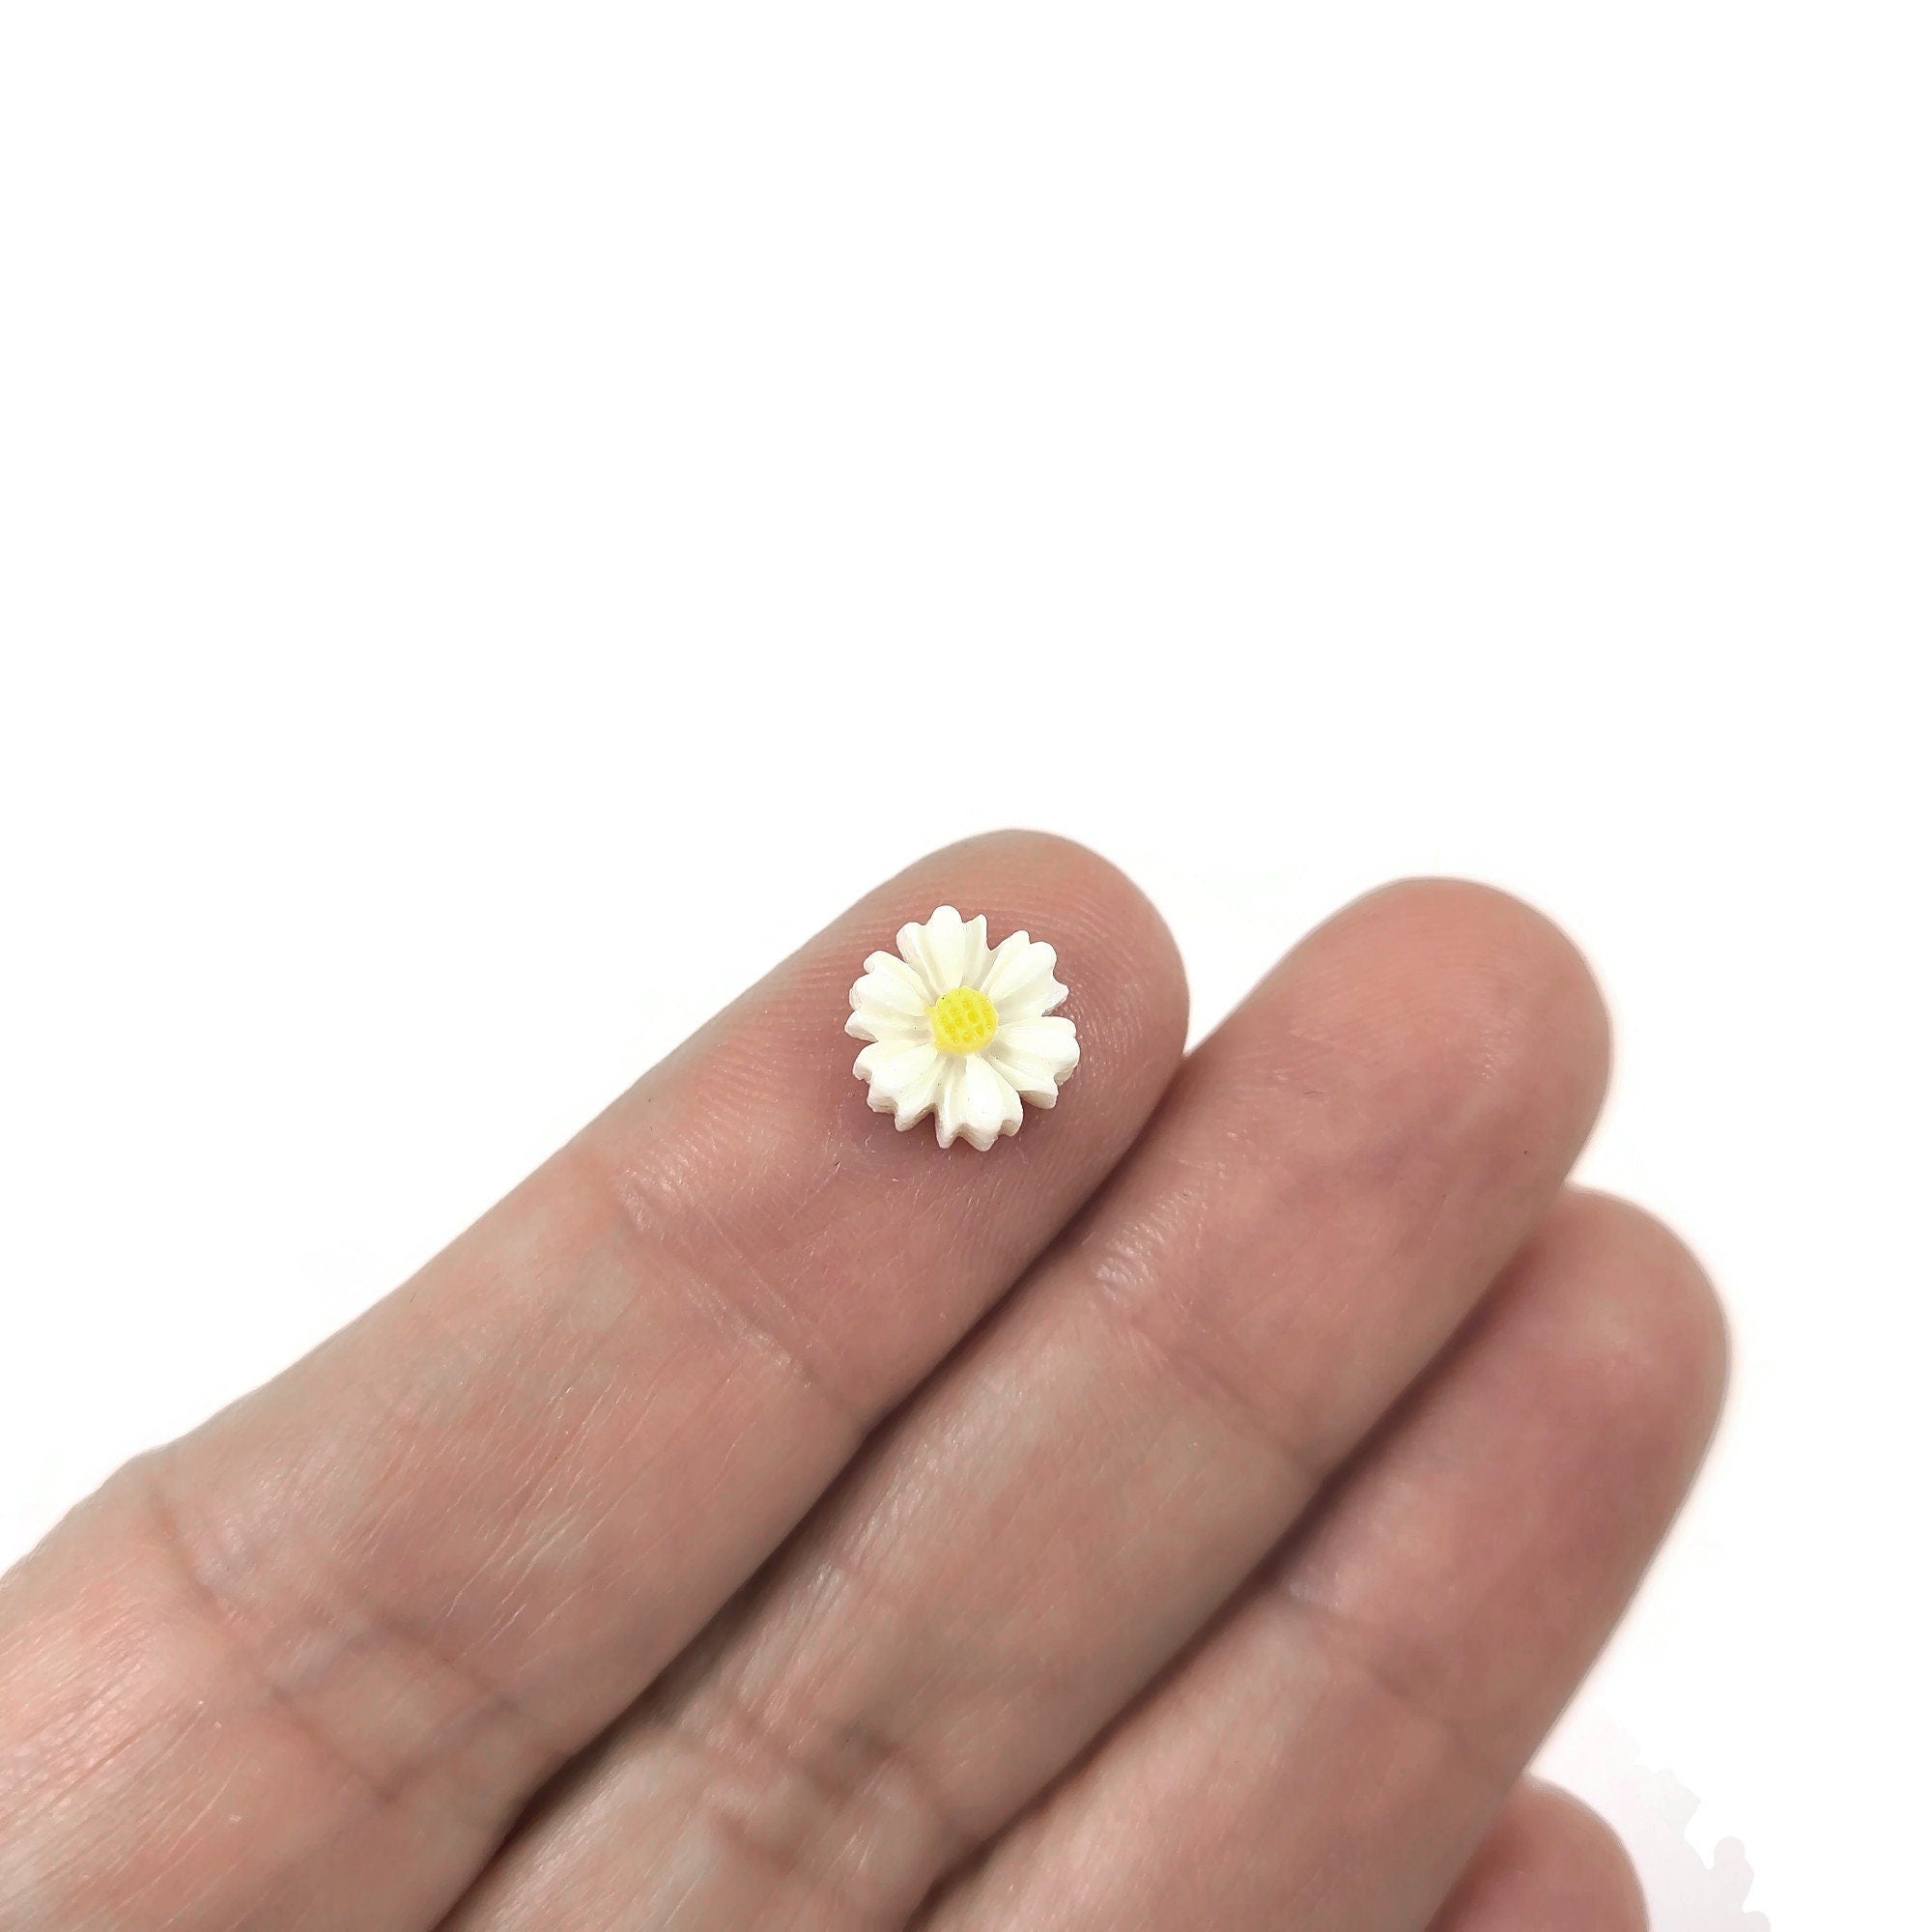 Resin daisy cabochons, Cute white flower embellishments, Flatback cabochons, Bulk pack, Jewelry making supplies